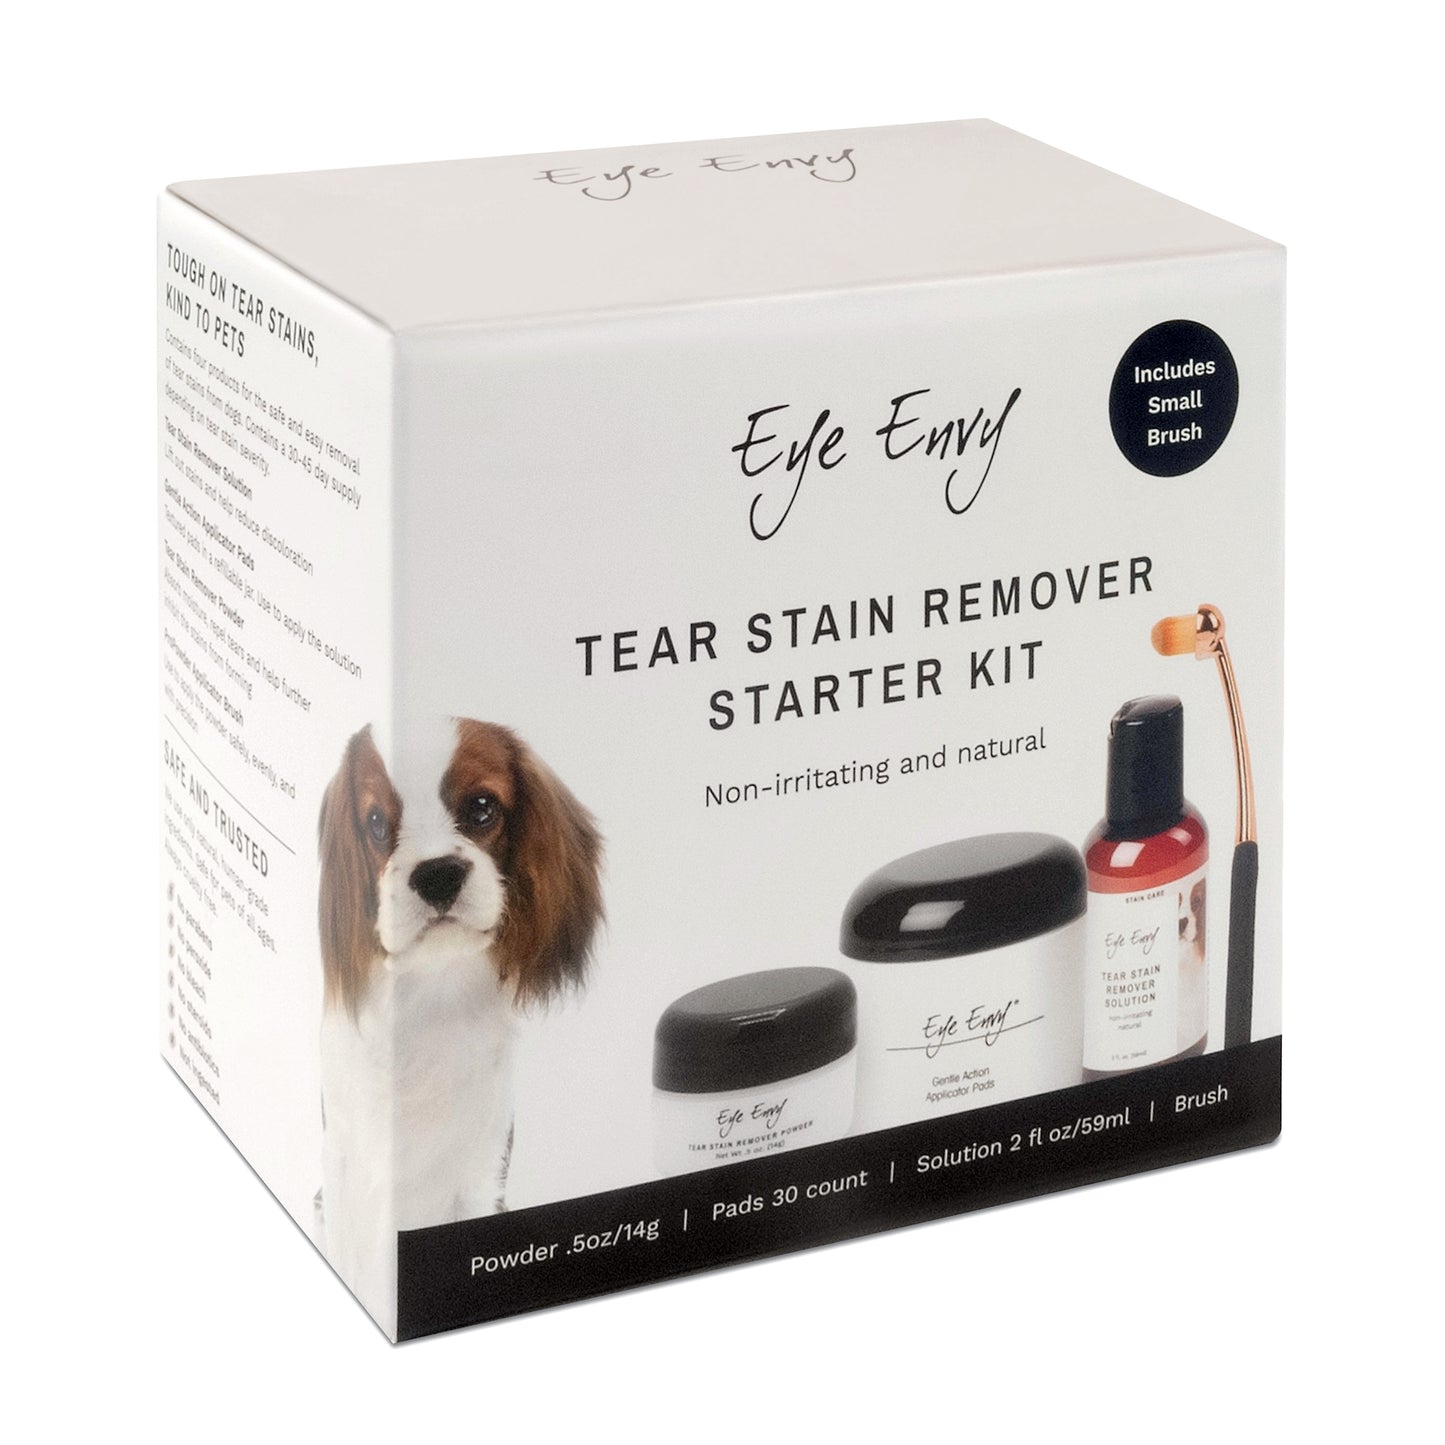 Dog Tear Stain Remover Starter Kit With Small ProPowder Brush